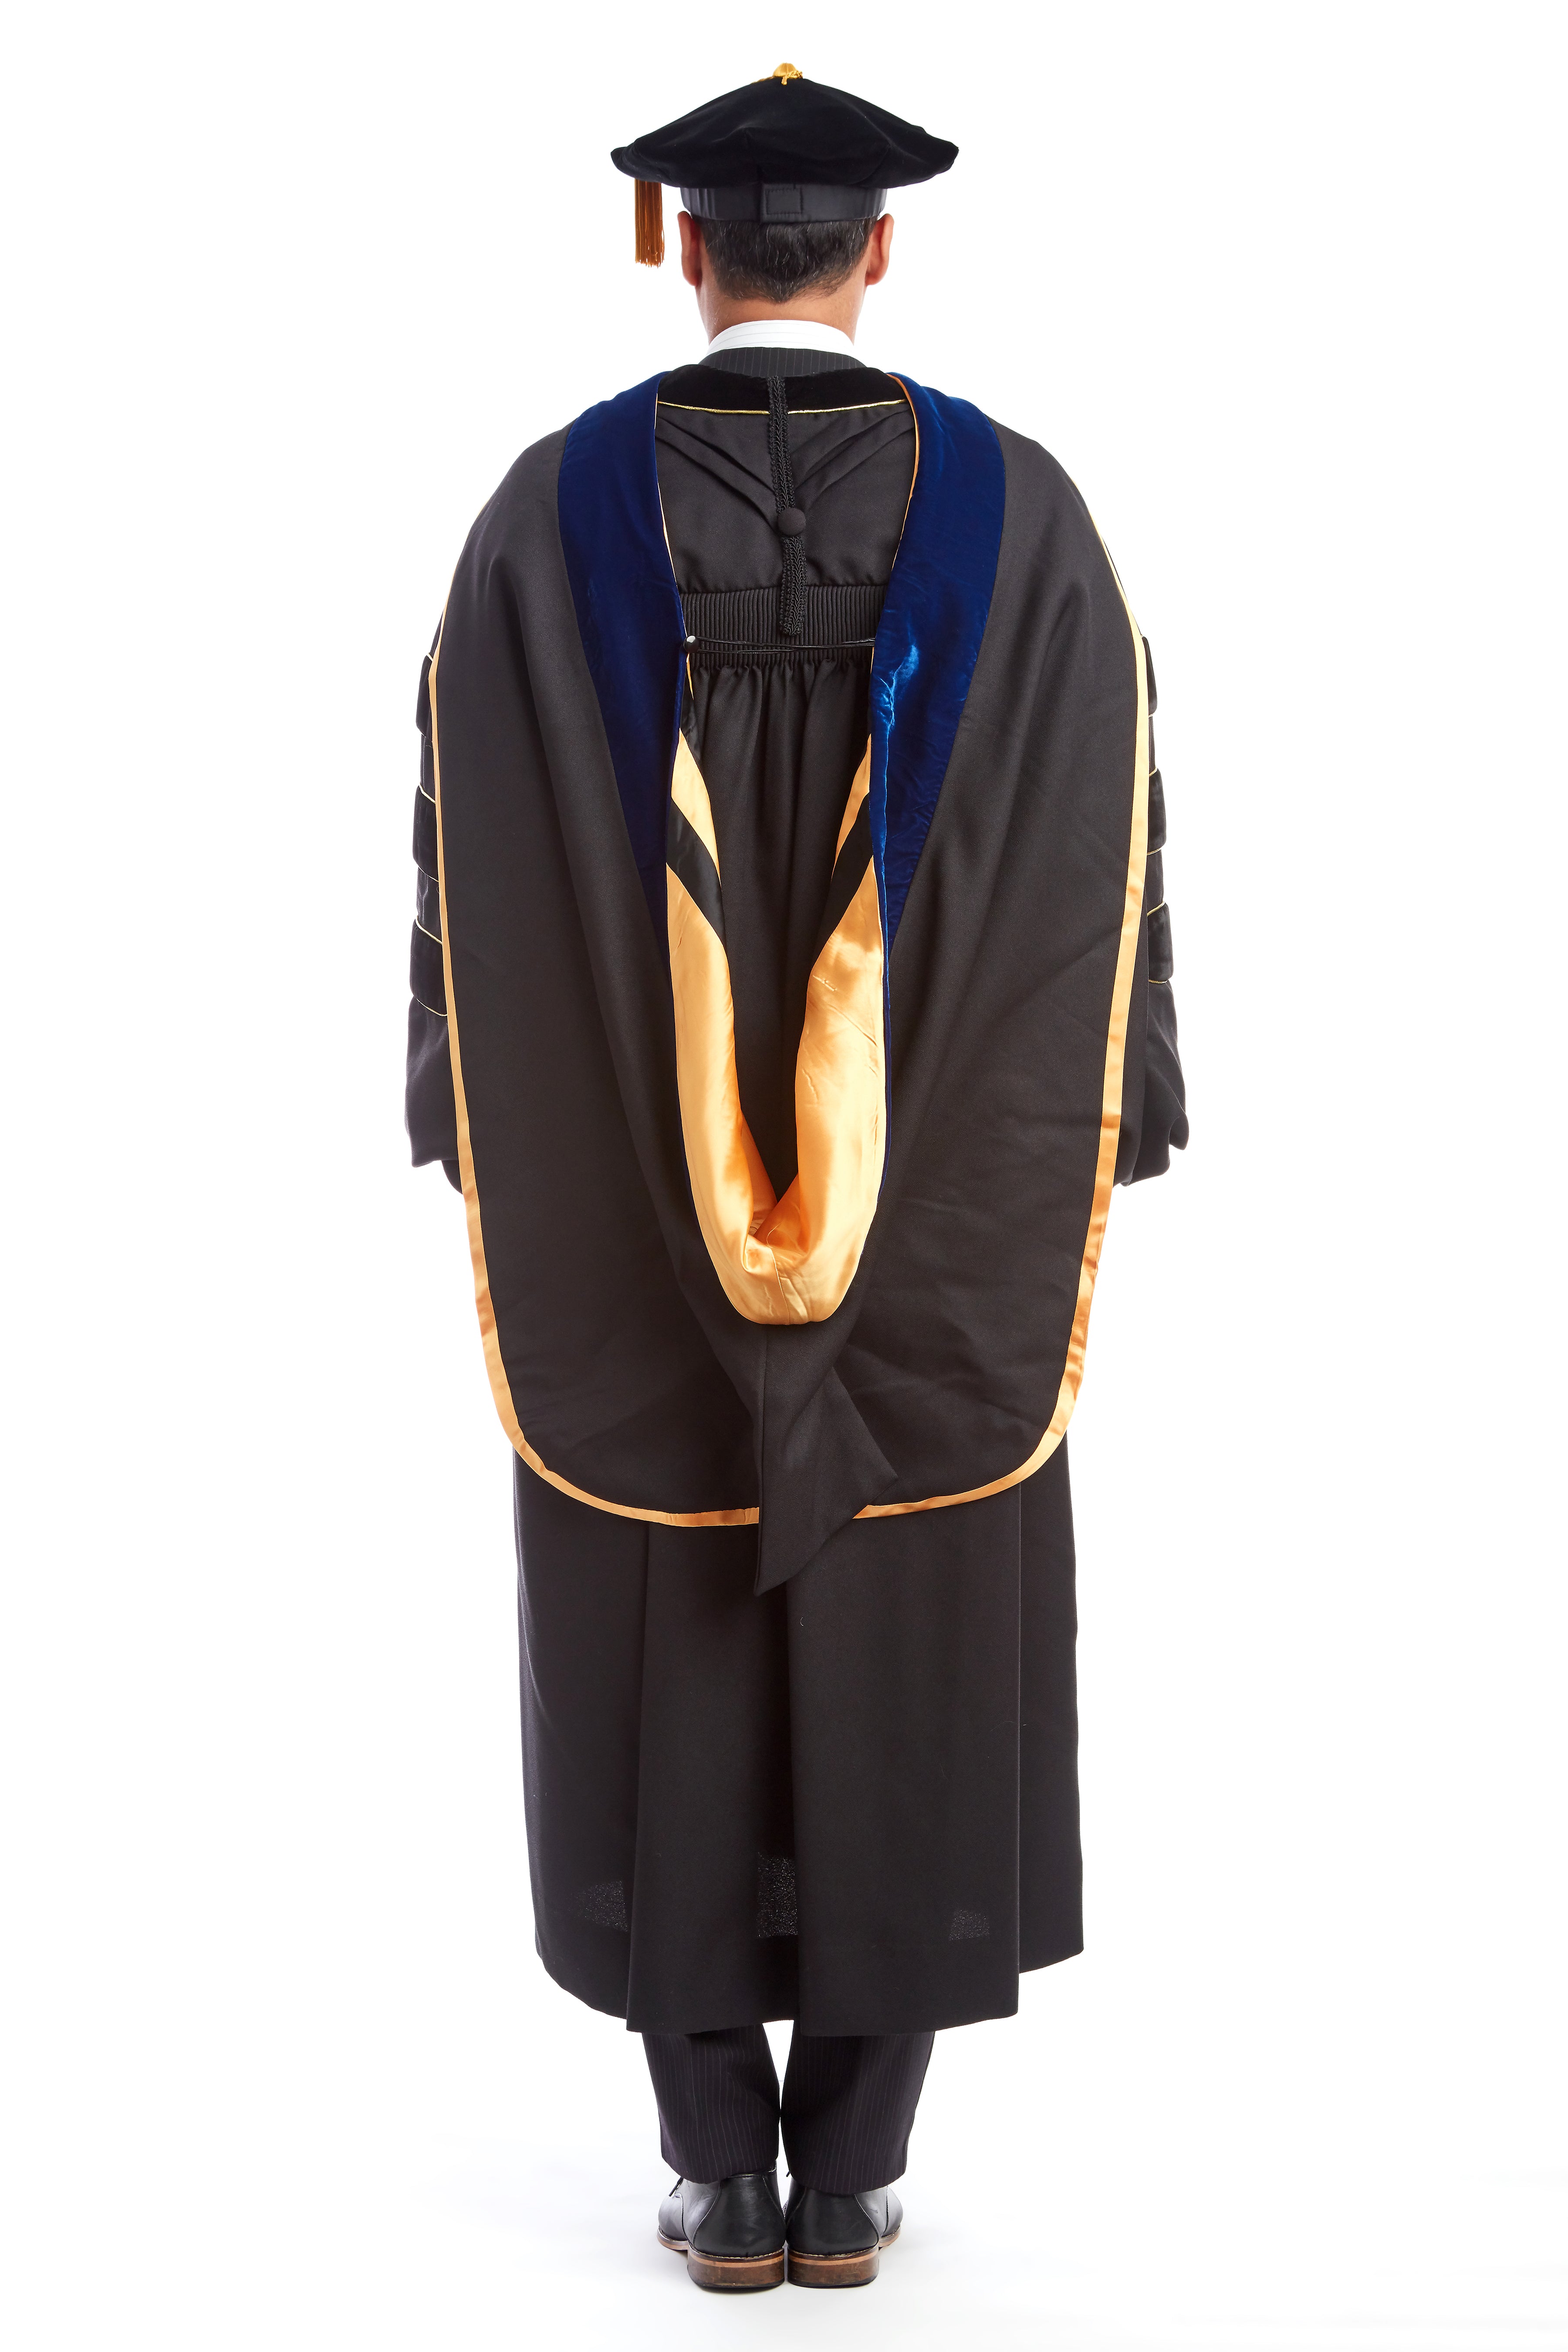 Deluxe Doctoral Graduation Gown & Hood Package – Graduation Attire